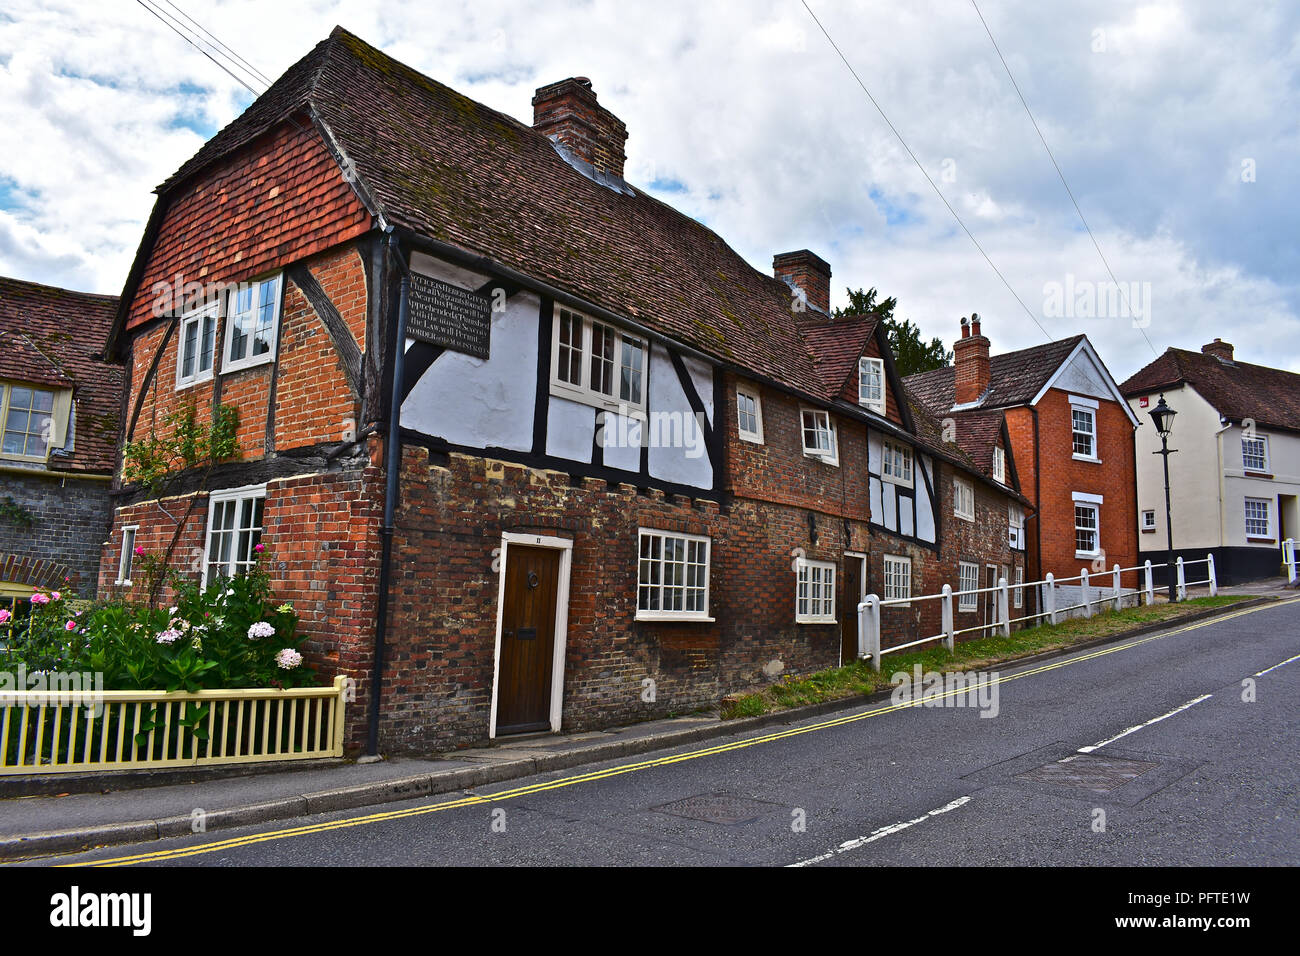 An old cottage on Bridge Road leading up to Wickham's square. An interesting old wall plaque threatens severe punishment to vagrants found nearby! Stock Photo